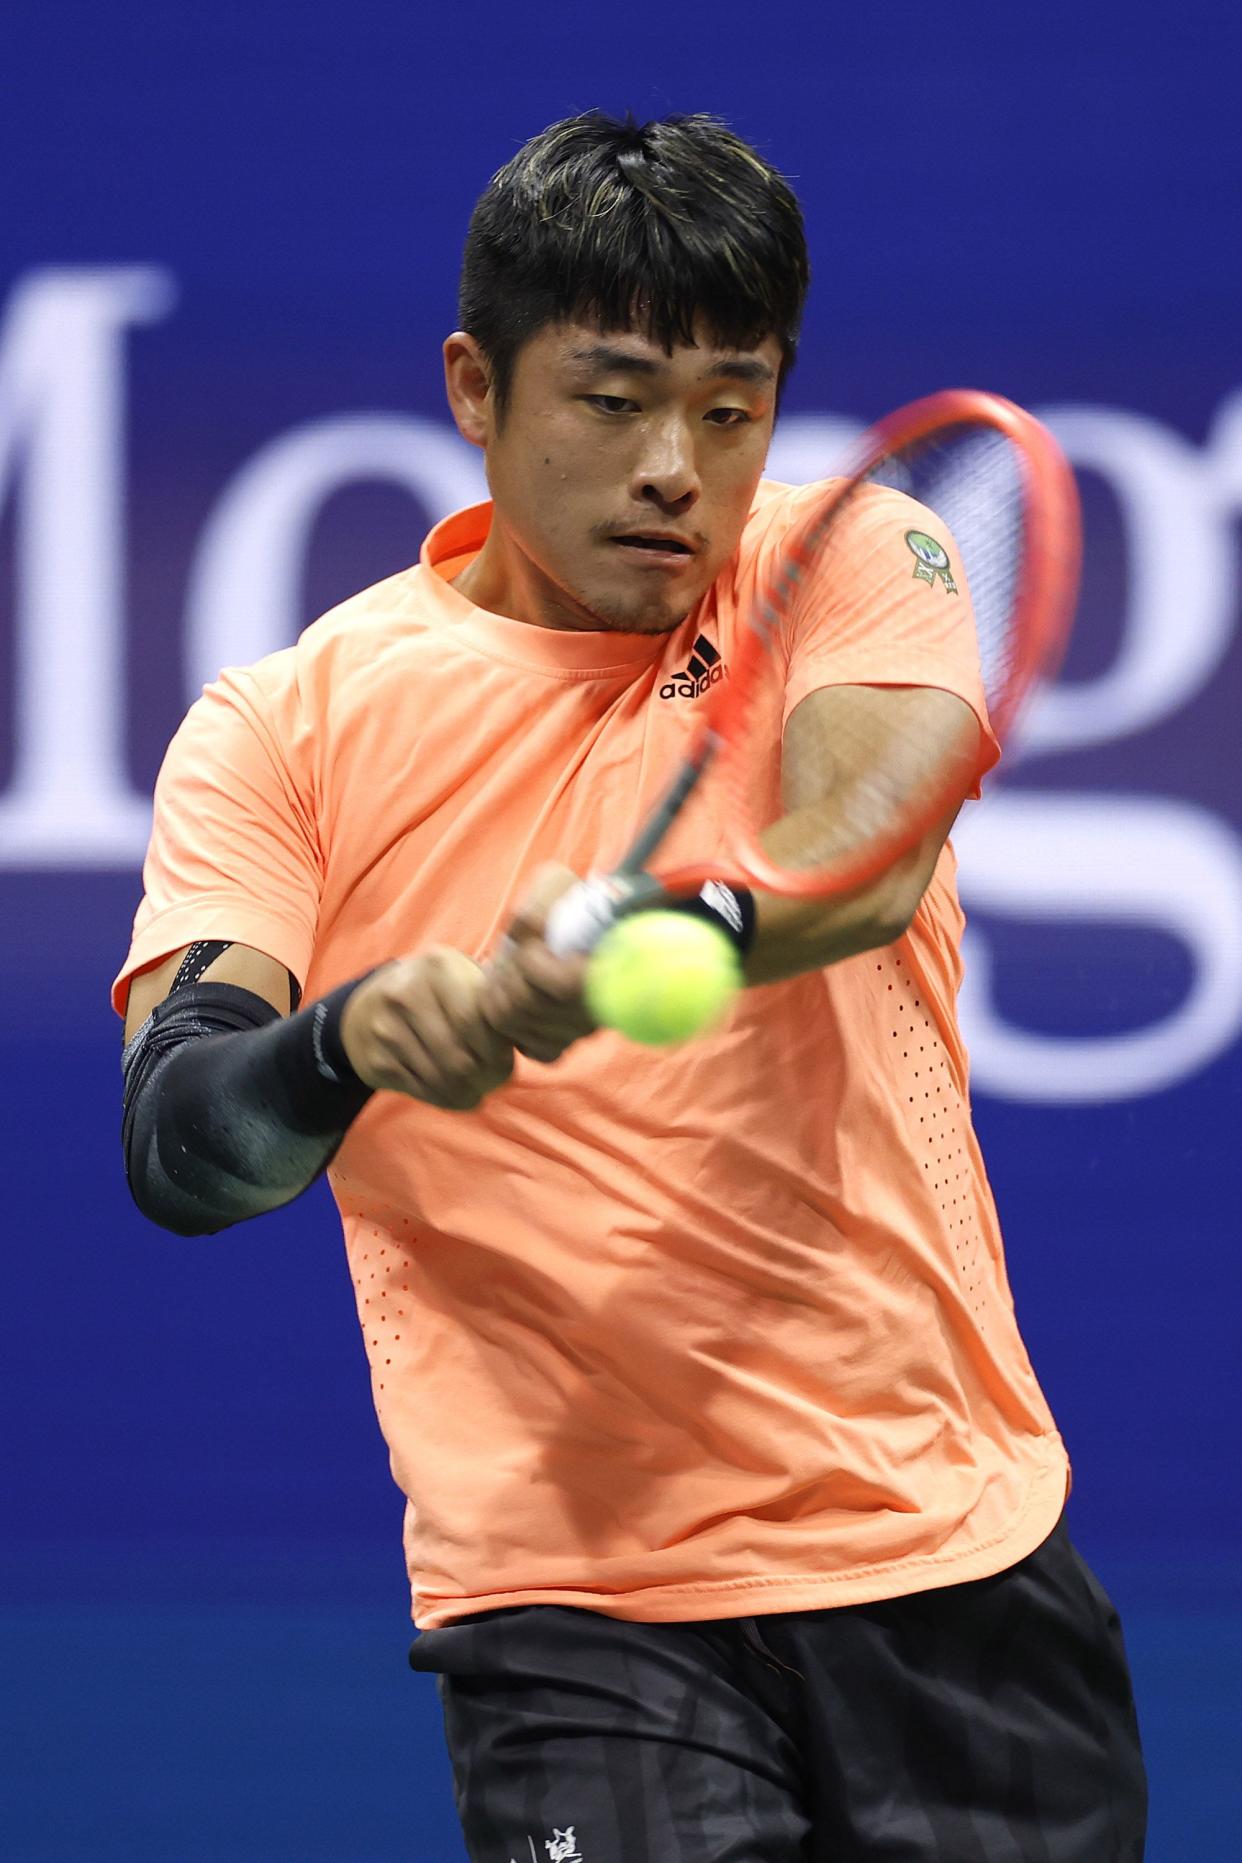 Yibing Wu of China plays a backhand against Daniil Medvedev during their Men's Singles Third Round match on Day 5 of the 2022 U.S. Open at USTA Billie Jean King National Tennis Center on Sept. 02, 2022, in Flushing, Queens.